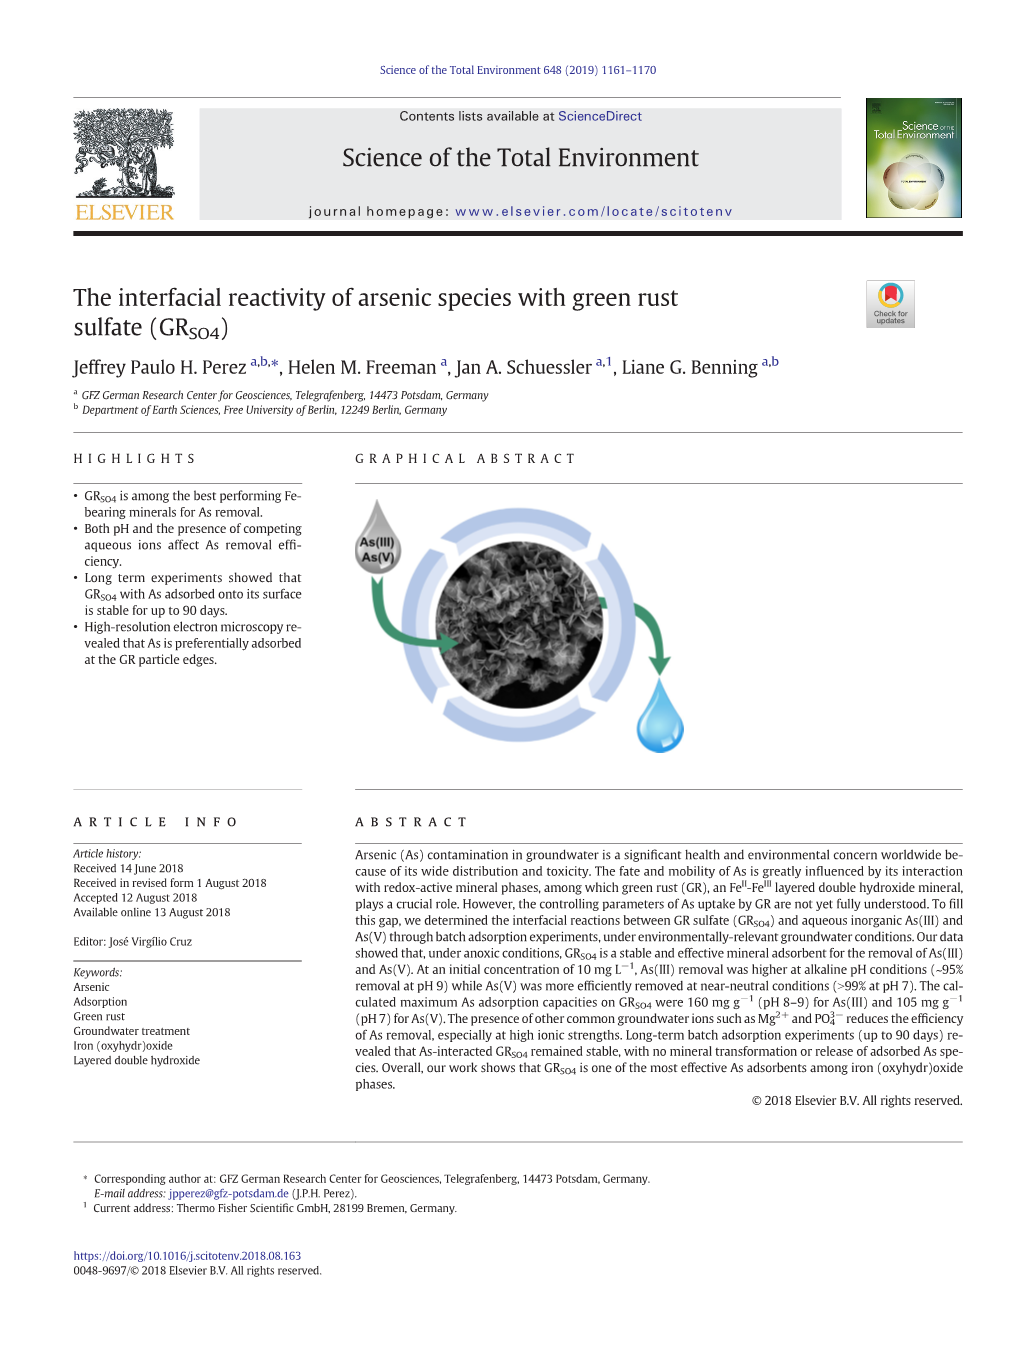 The Interfacial Reactivity of Arsenic Species with Green Rust Sulfate (GRSO4) Jeffrey Paulo H